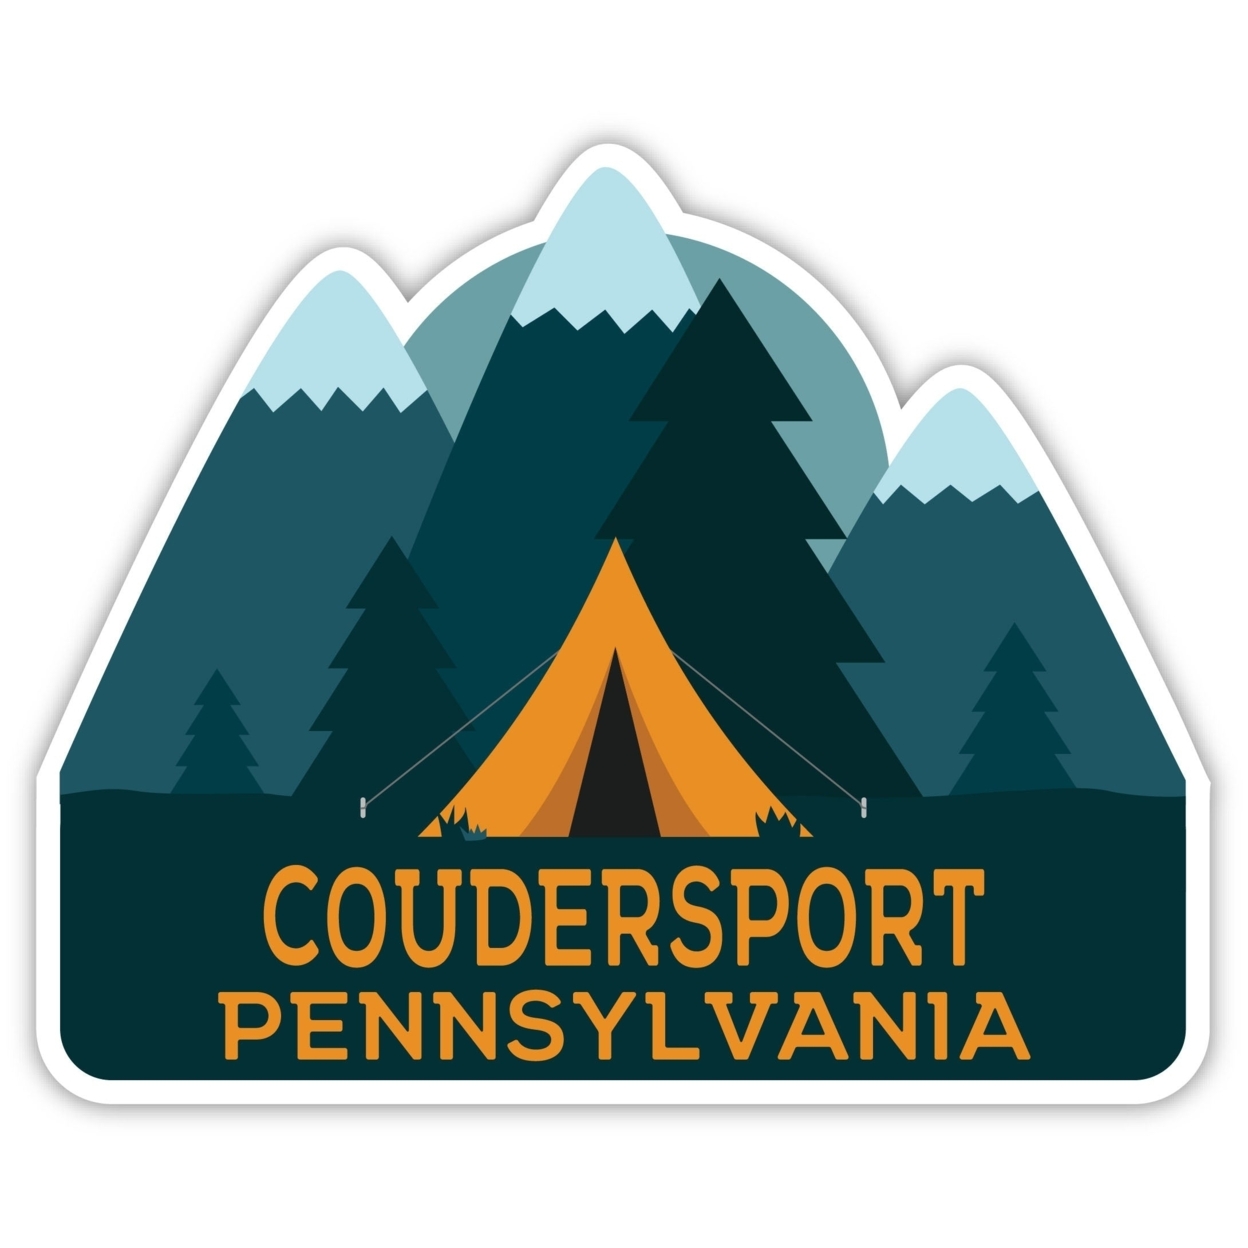 Coudersport Pennsylvania Souvenir Decorative Stickers (Choose Theme And Size) - 4-Pack, 12-Inch, Bear